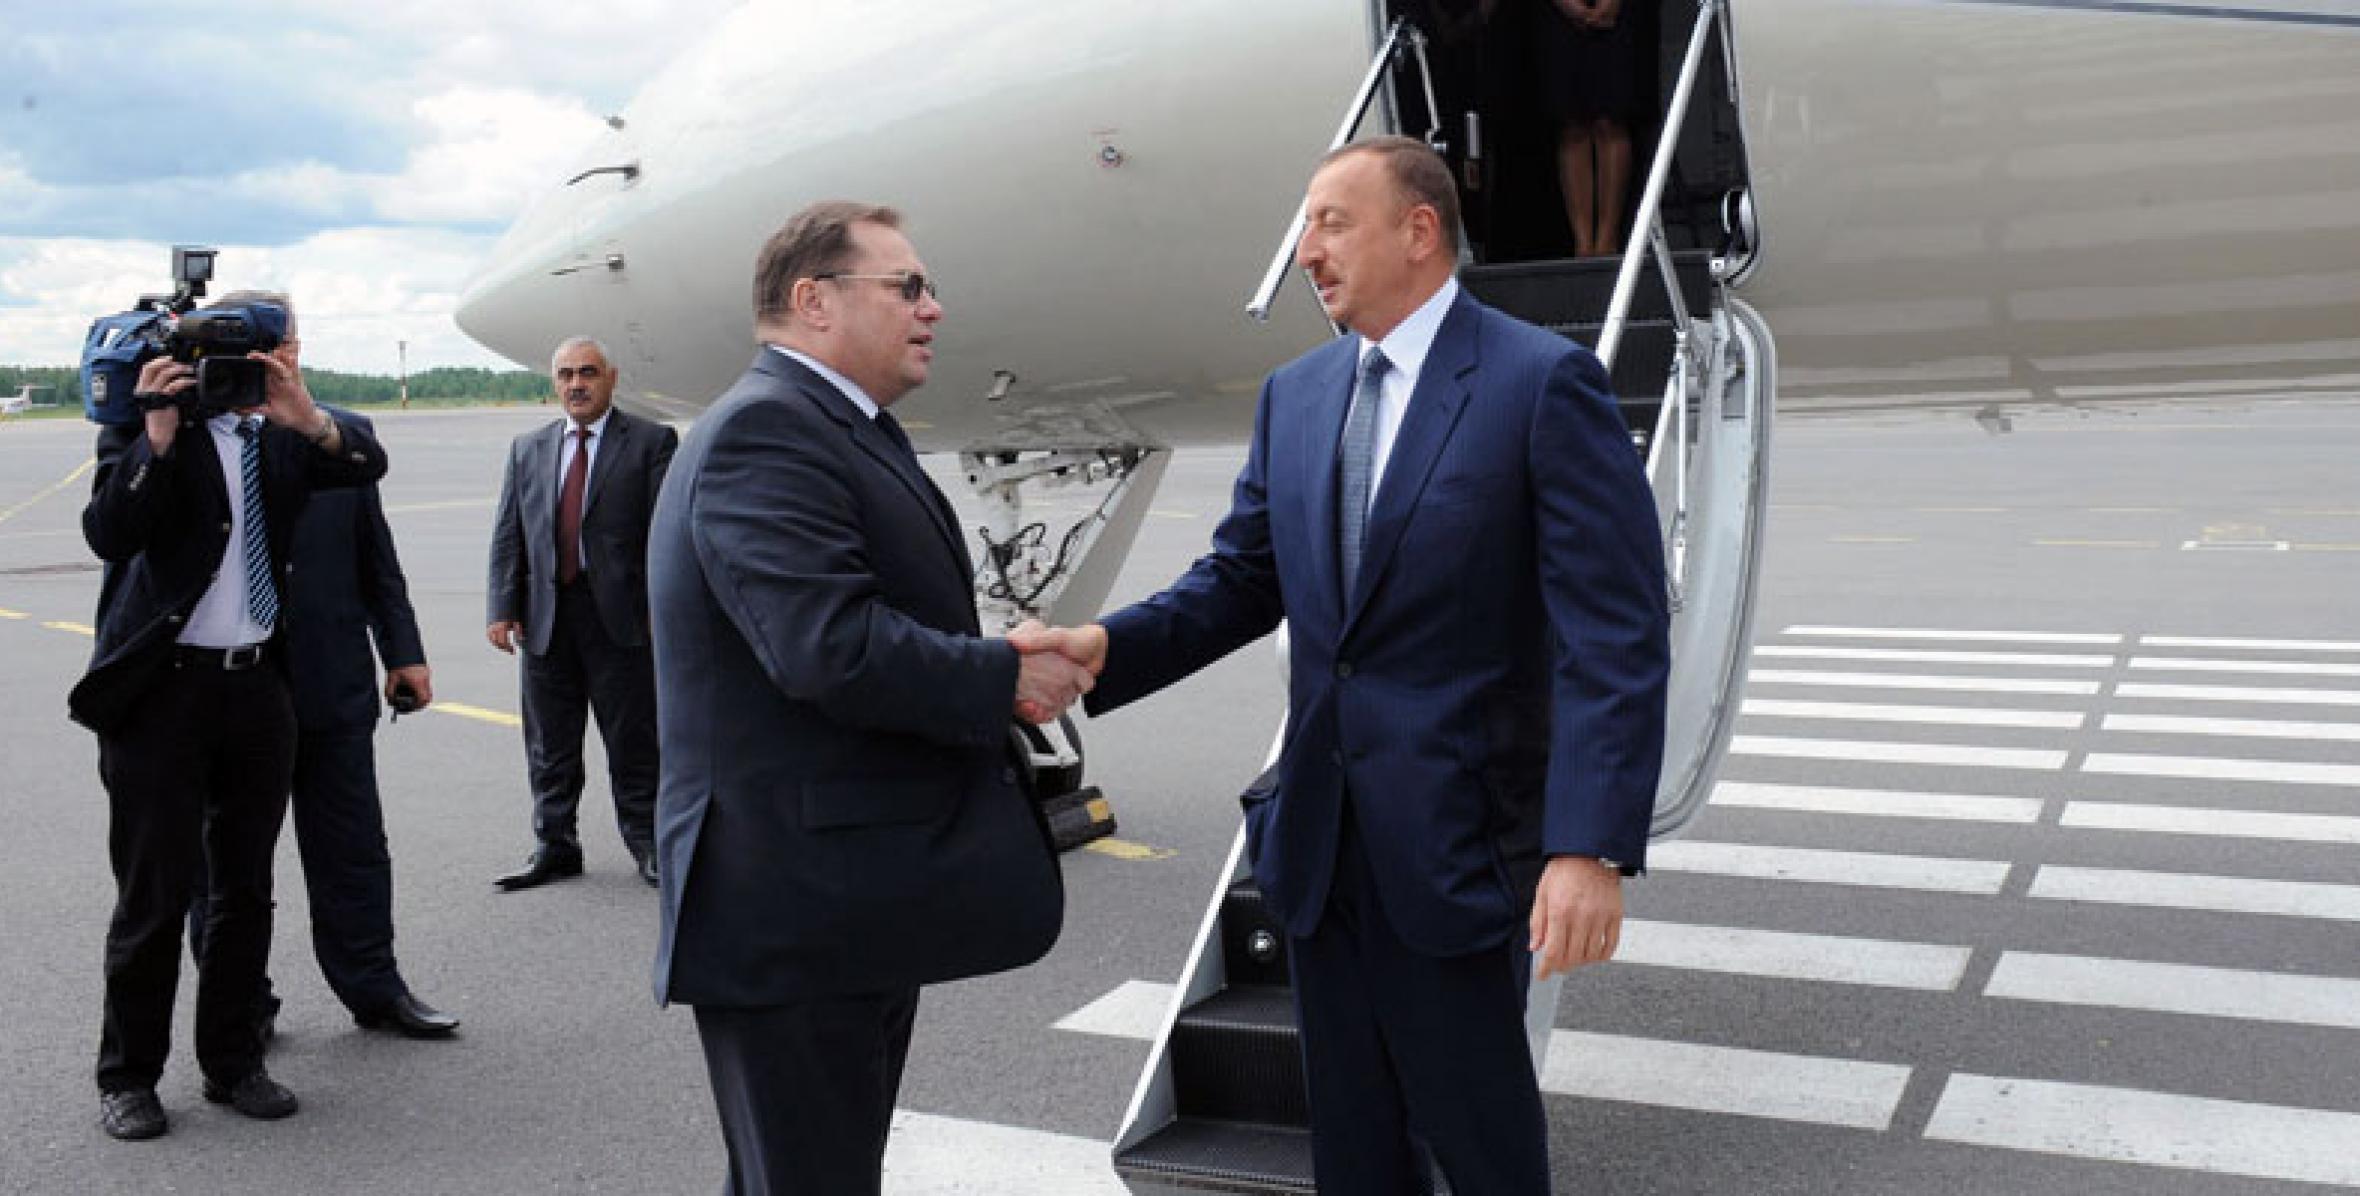 Ilham Aliyev arrived in Russia for a working visit